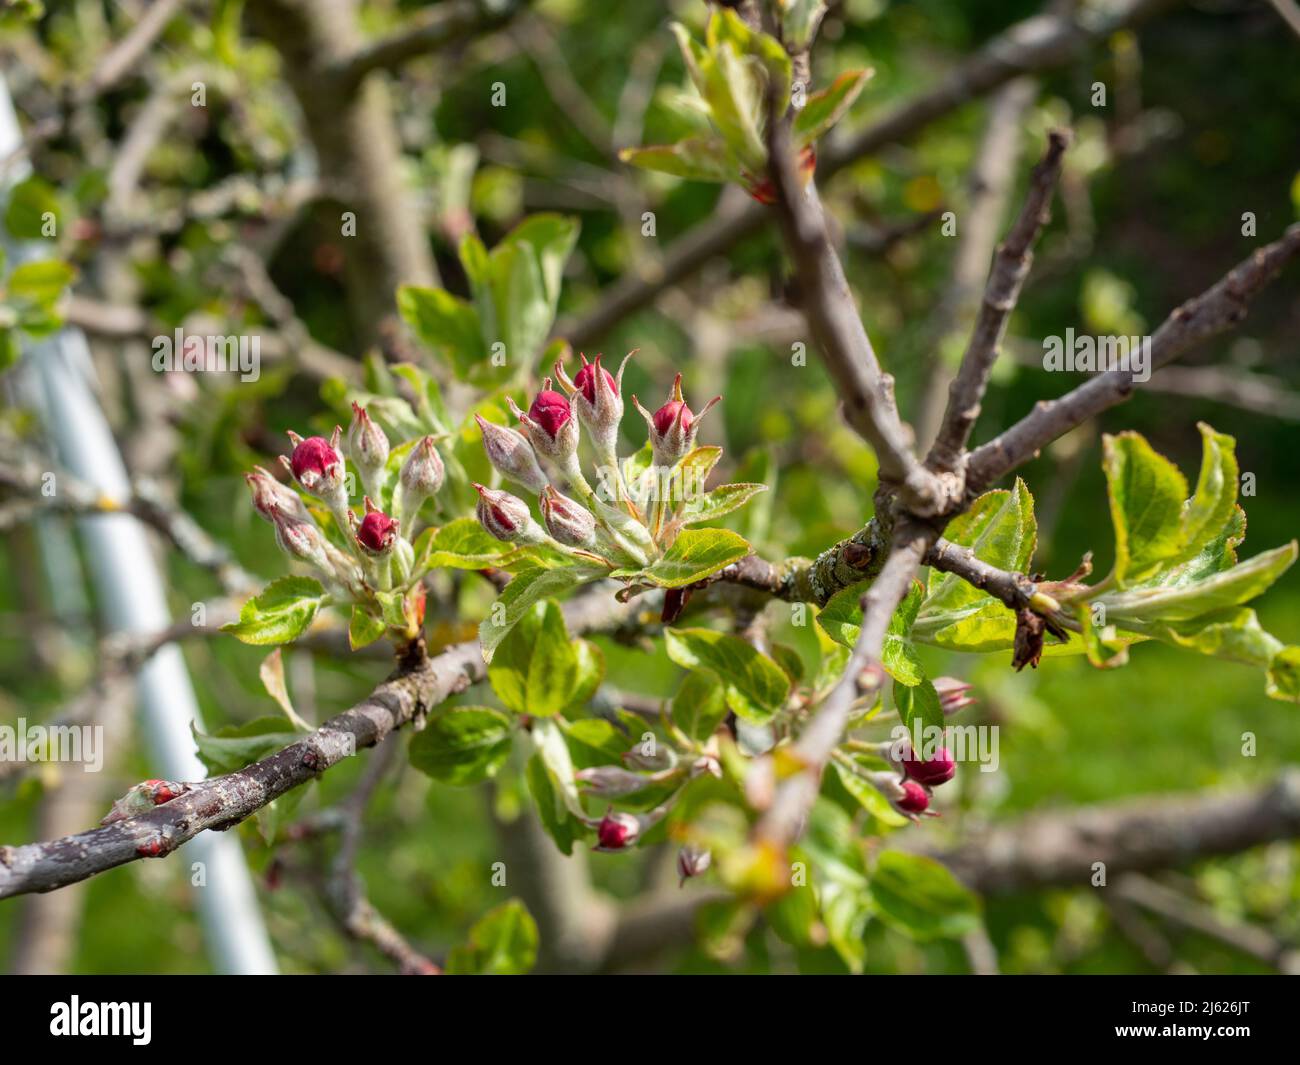 Blossoms of a fruit tree in spring Stock Photo